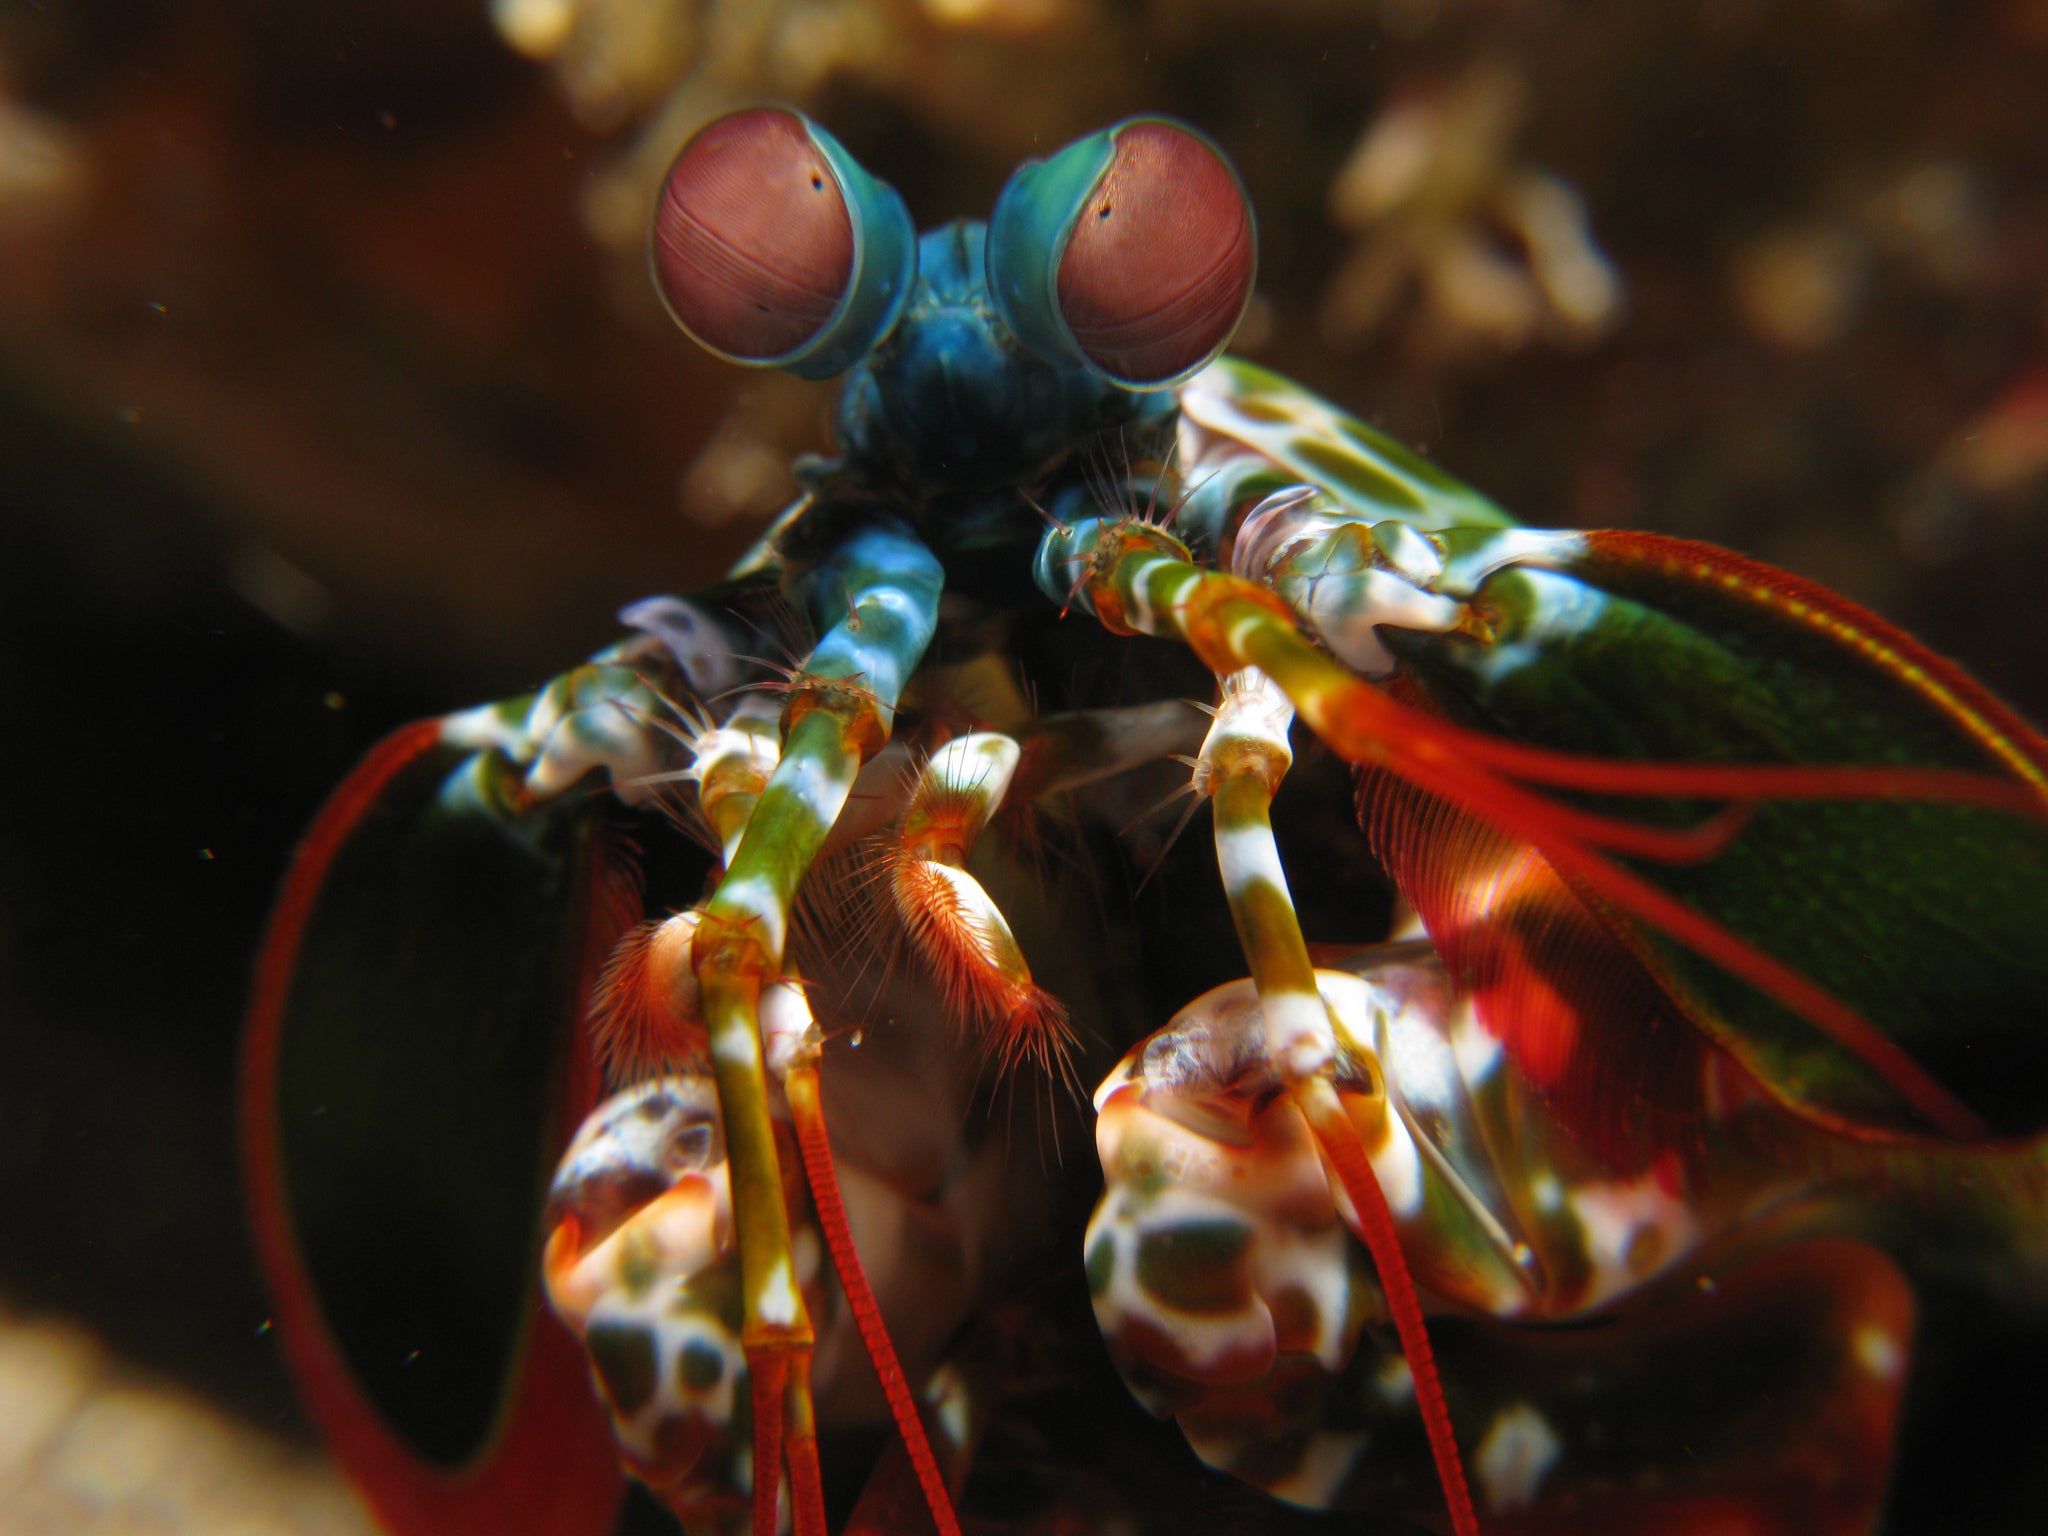 The eyes of mantis shrimp have inspired new cancer-detecting cameras